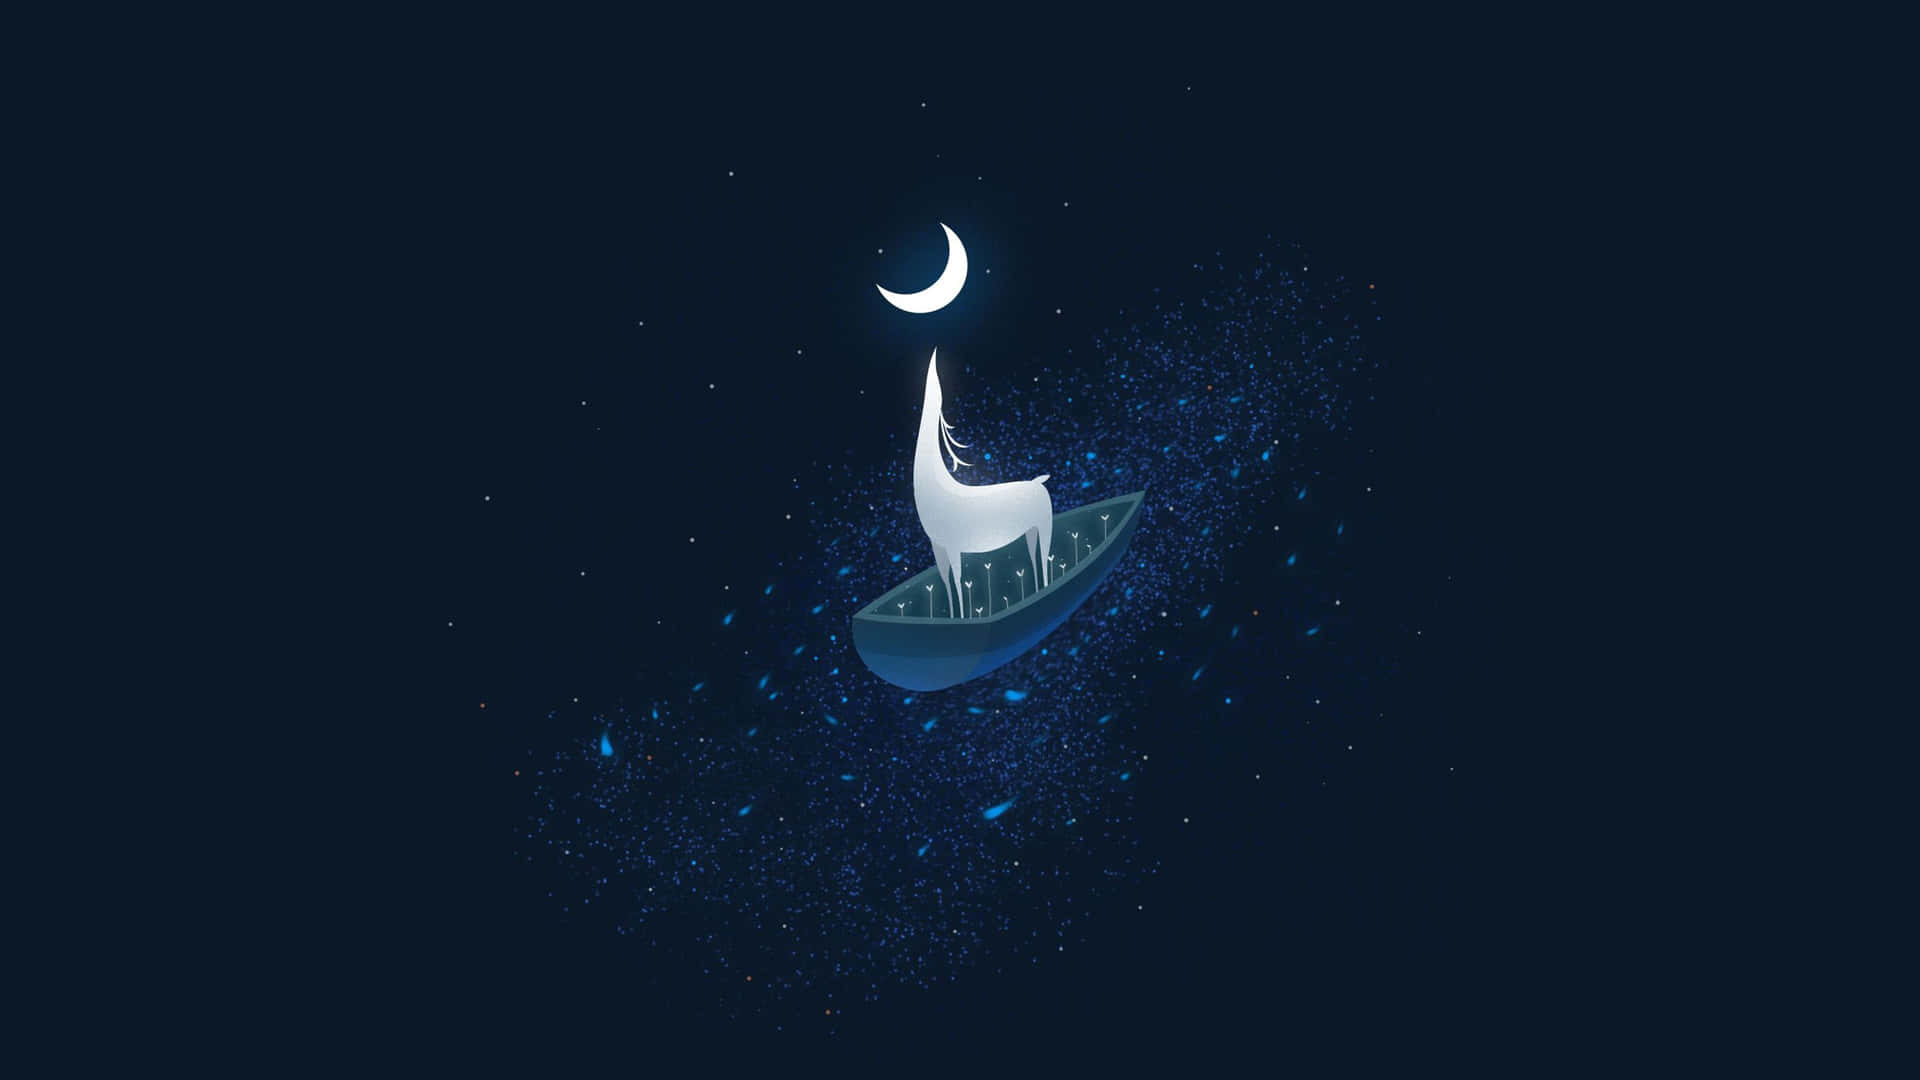 "A magical night under the dazzling moon" Wallpaper